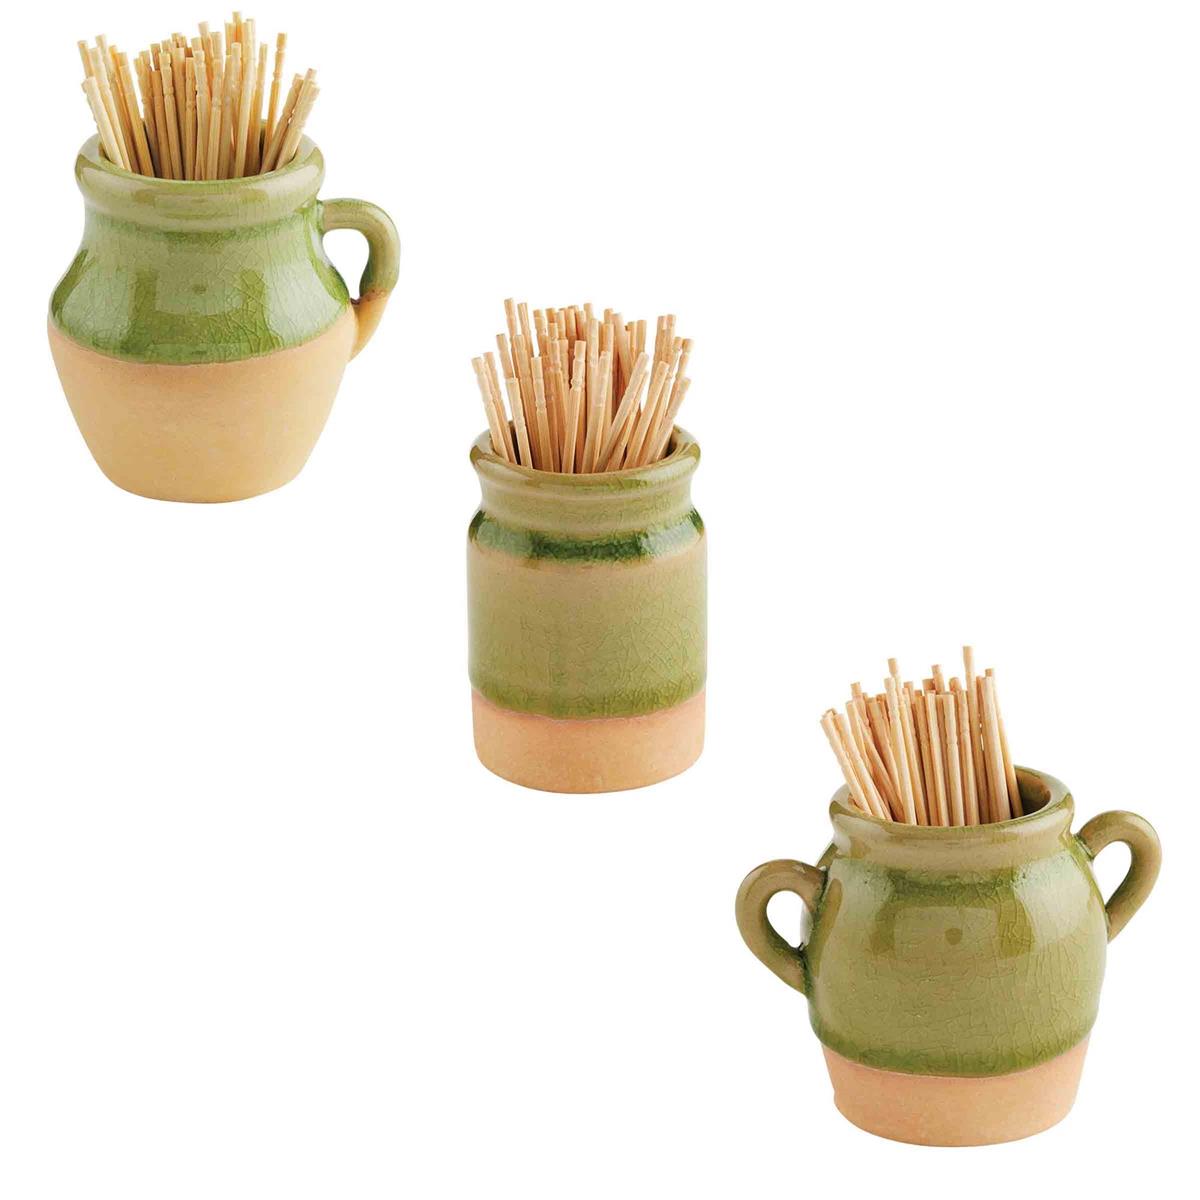 all three styles of toothpick mini pots on a white background